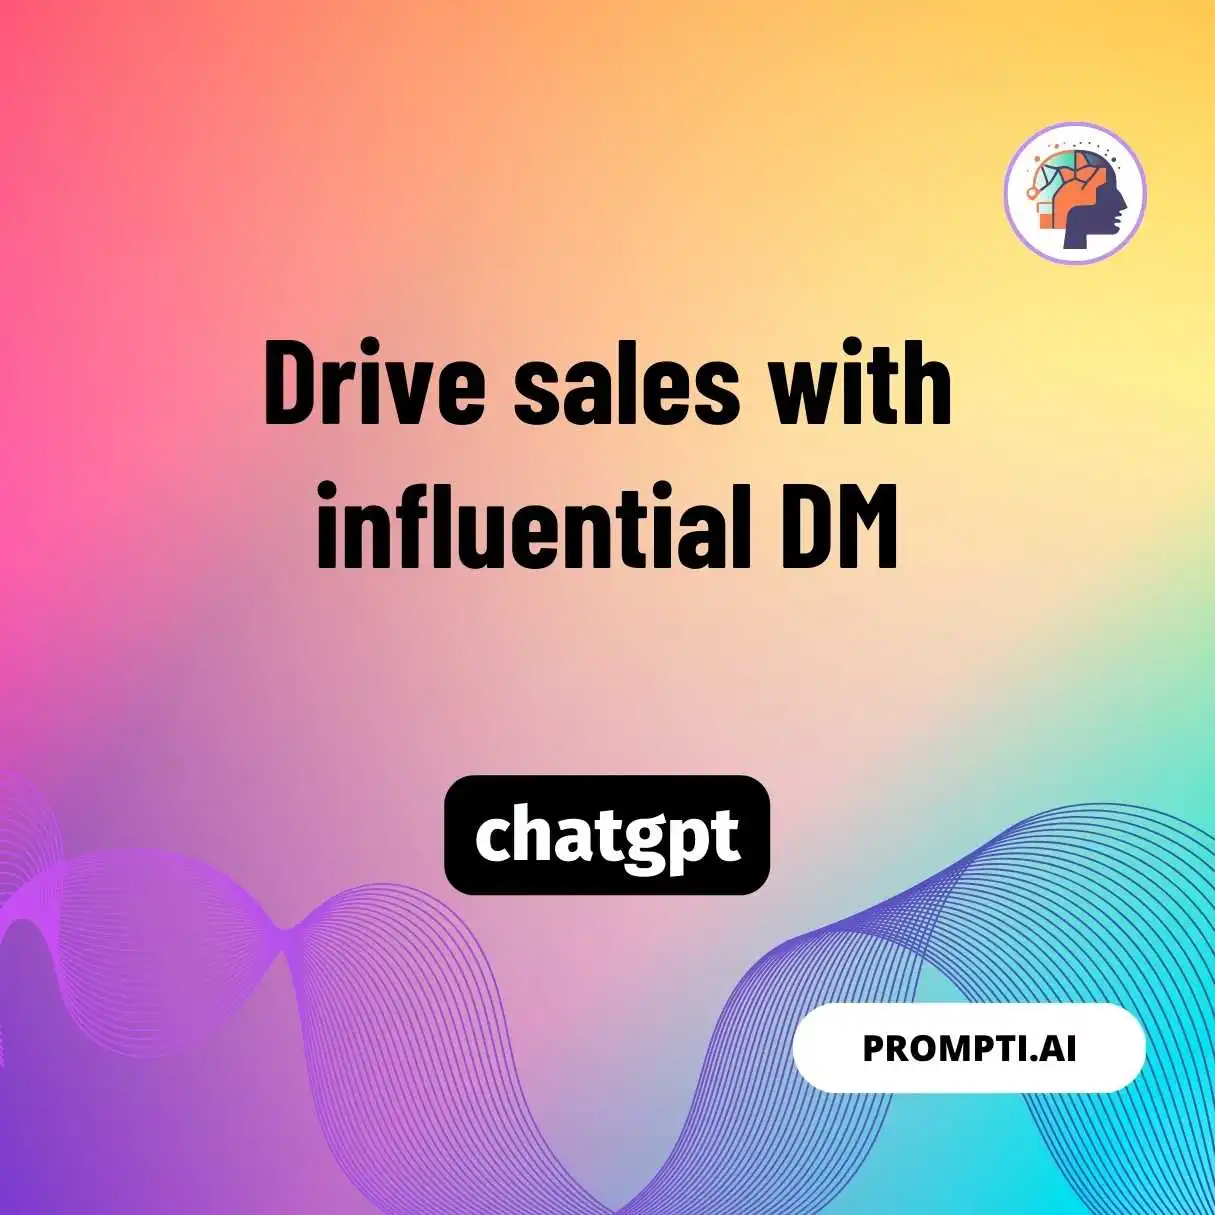 Drive sales with influential DM